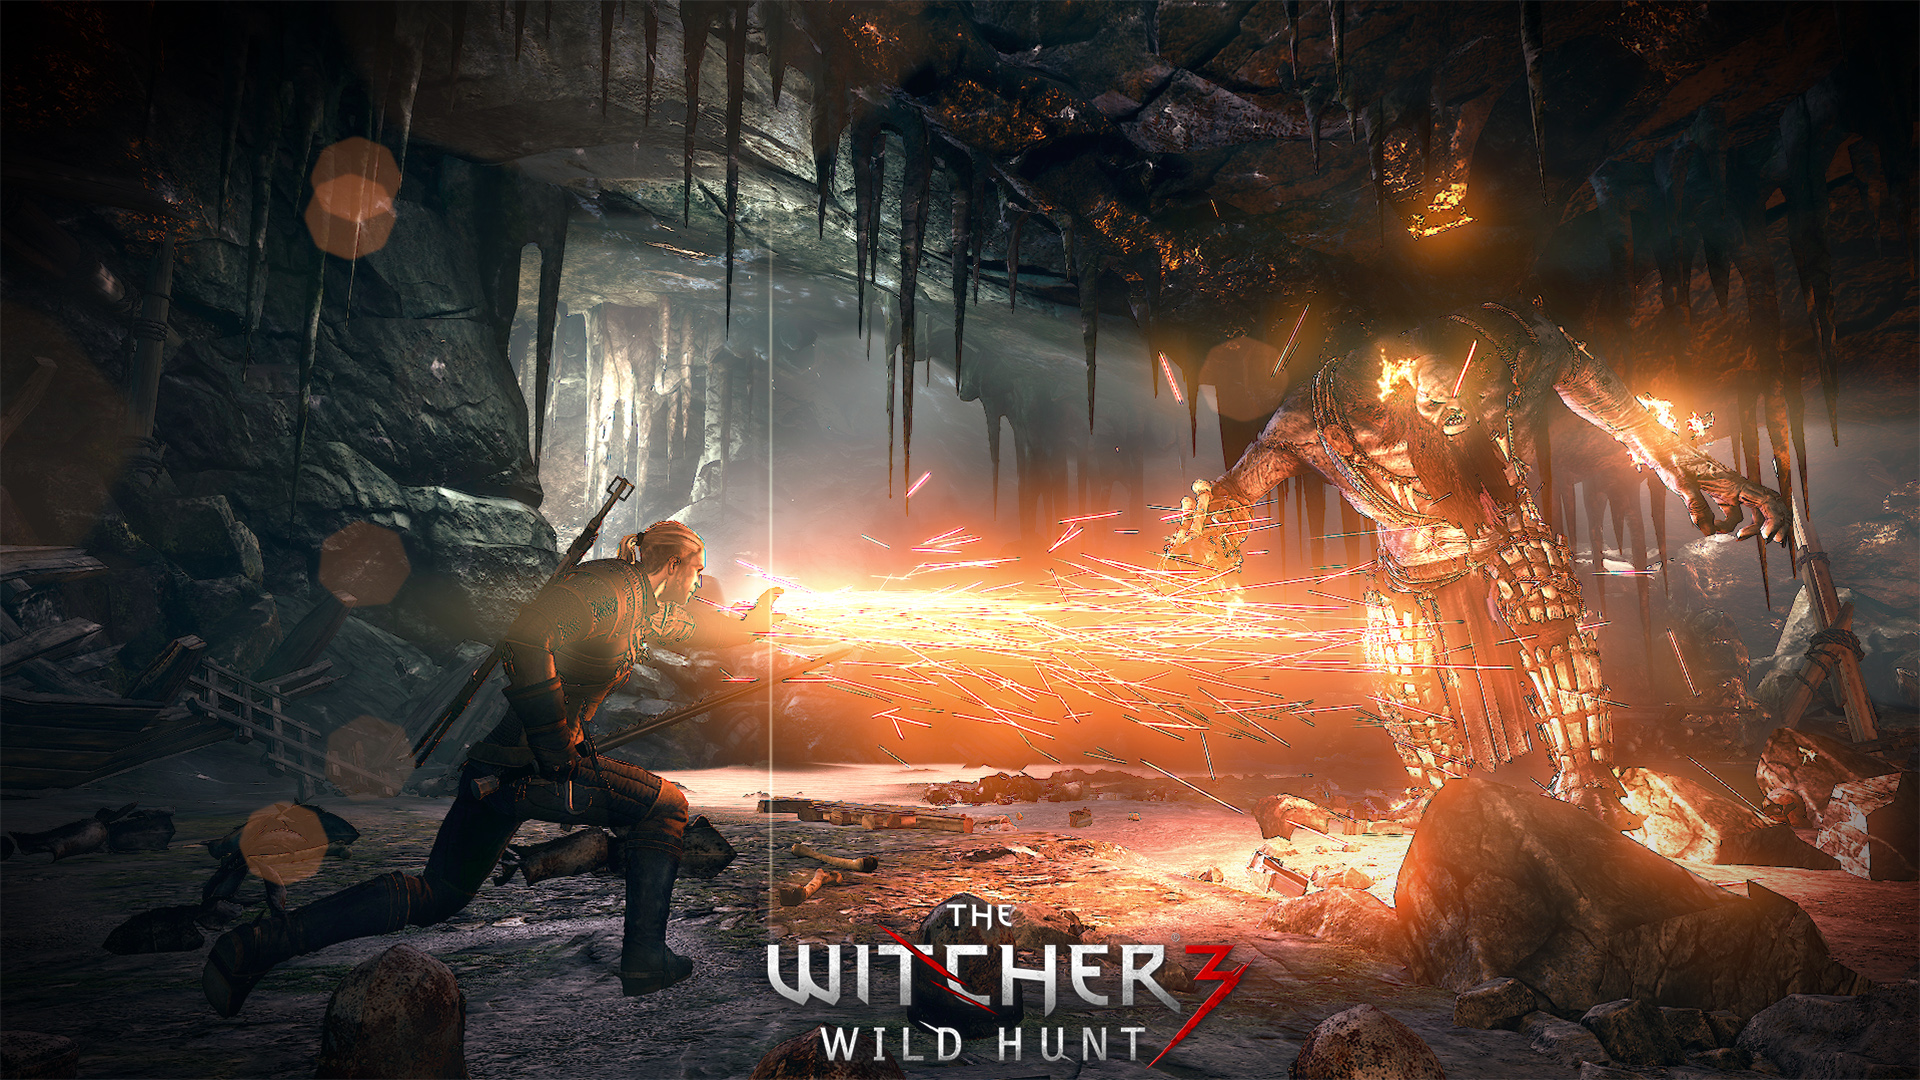 The Witcher 3: Wild Hunt wallpapers 1920x1080 | HD Wallpapers